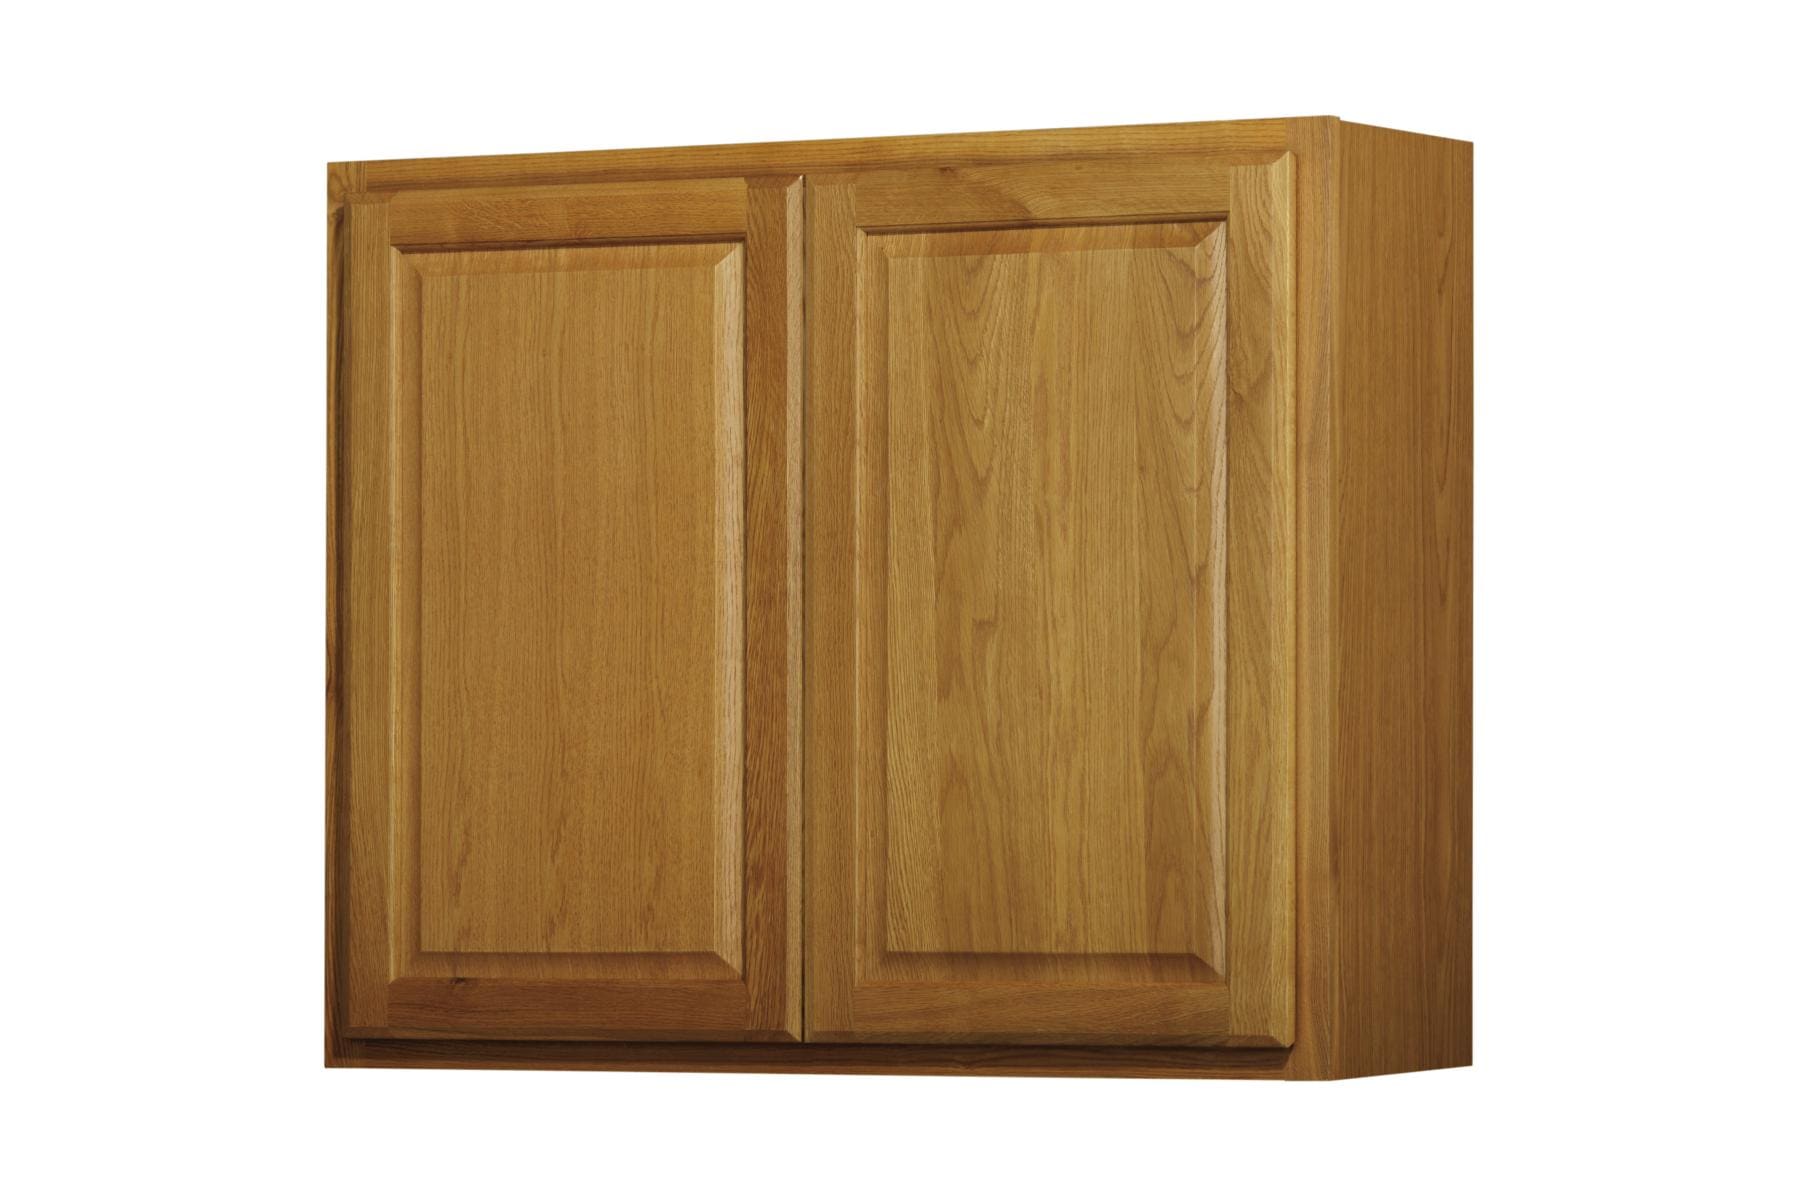 Stock Cabinet In The Kitchen Cabinets, 12 Inch Cabinet Doors